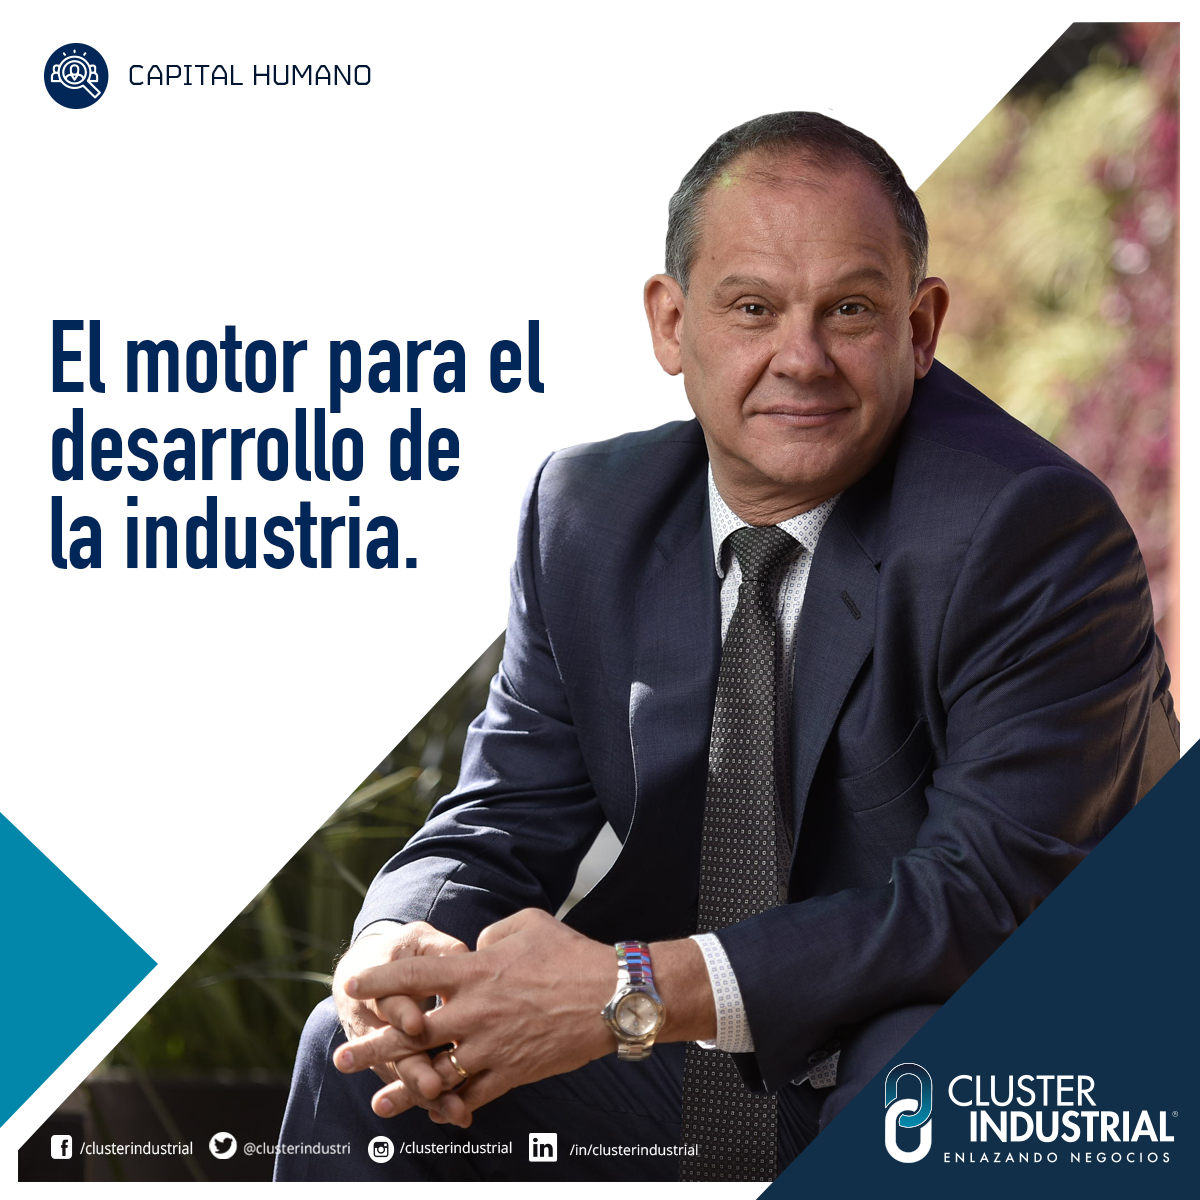 Cluster Industrial - Capital humano: 